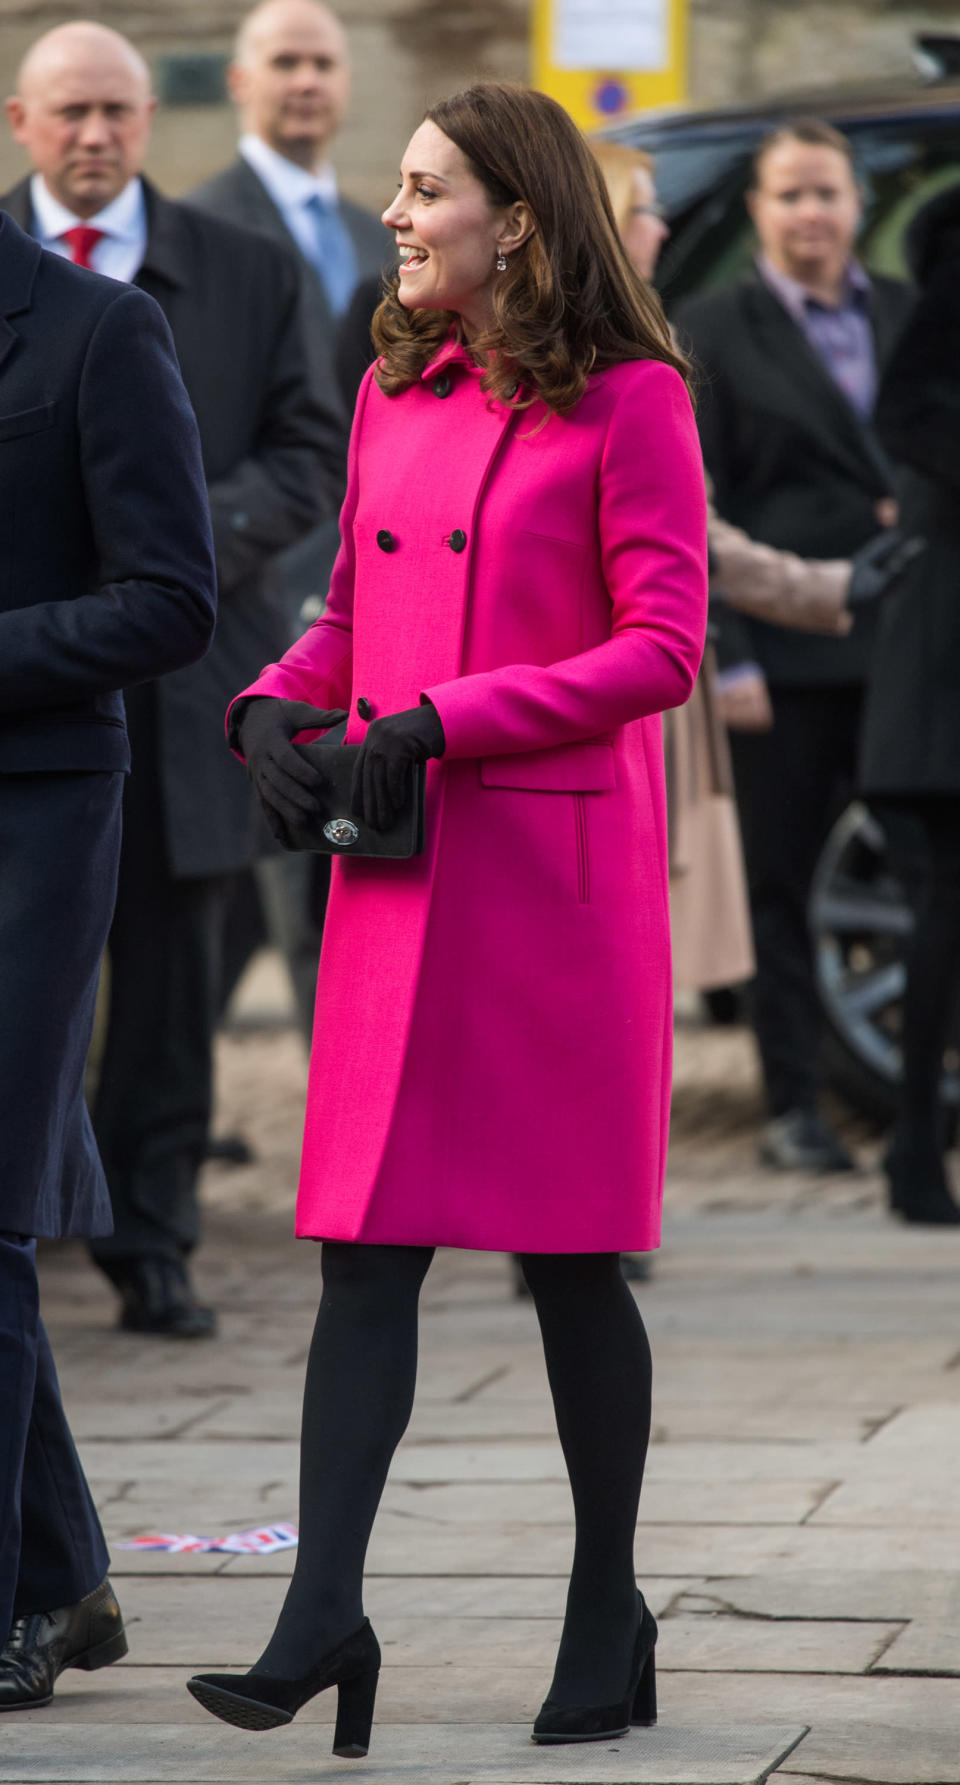 <p><strong>The occassion:</strong> A visit to Coventry Cathedral in Coventry. <br><strong>The look:</strong> A Mulberry double-breasted fucshia coat with the Mulberry Bayswater clutch, Tod’s black suede pumps and Kiki McDonough drop earrings. <br>[Photo: Getty] </p>